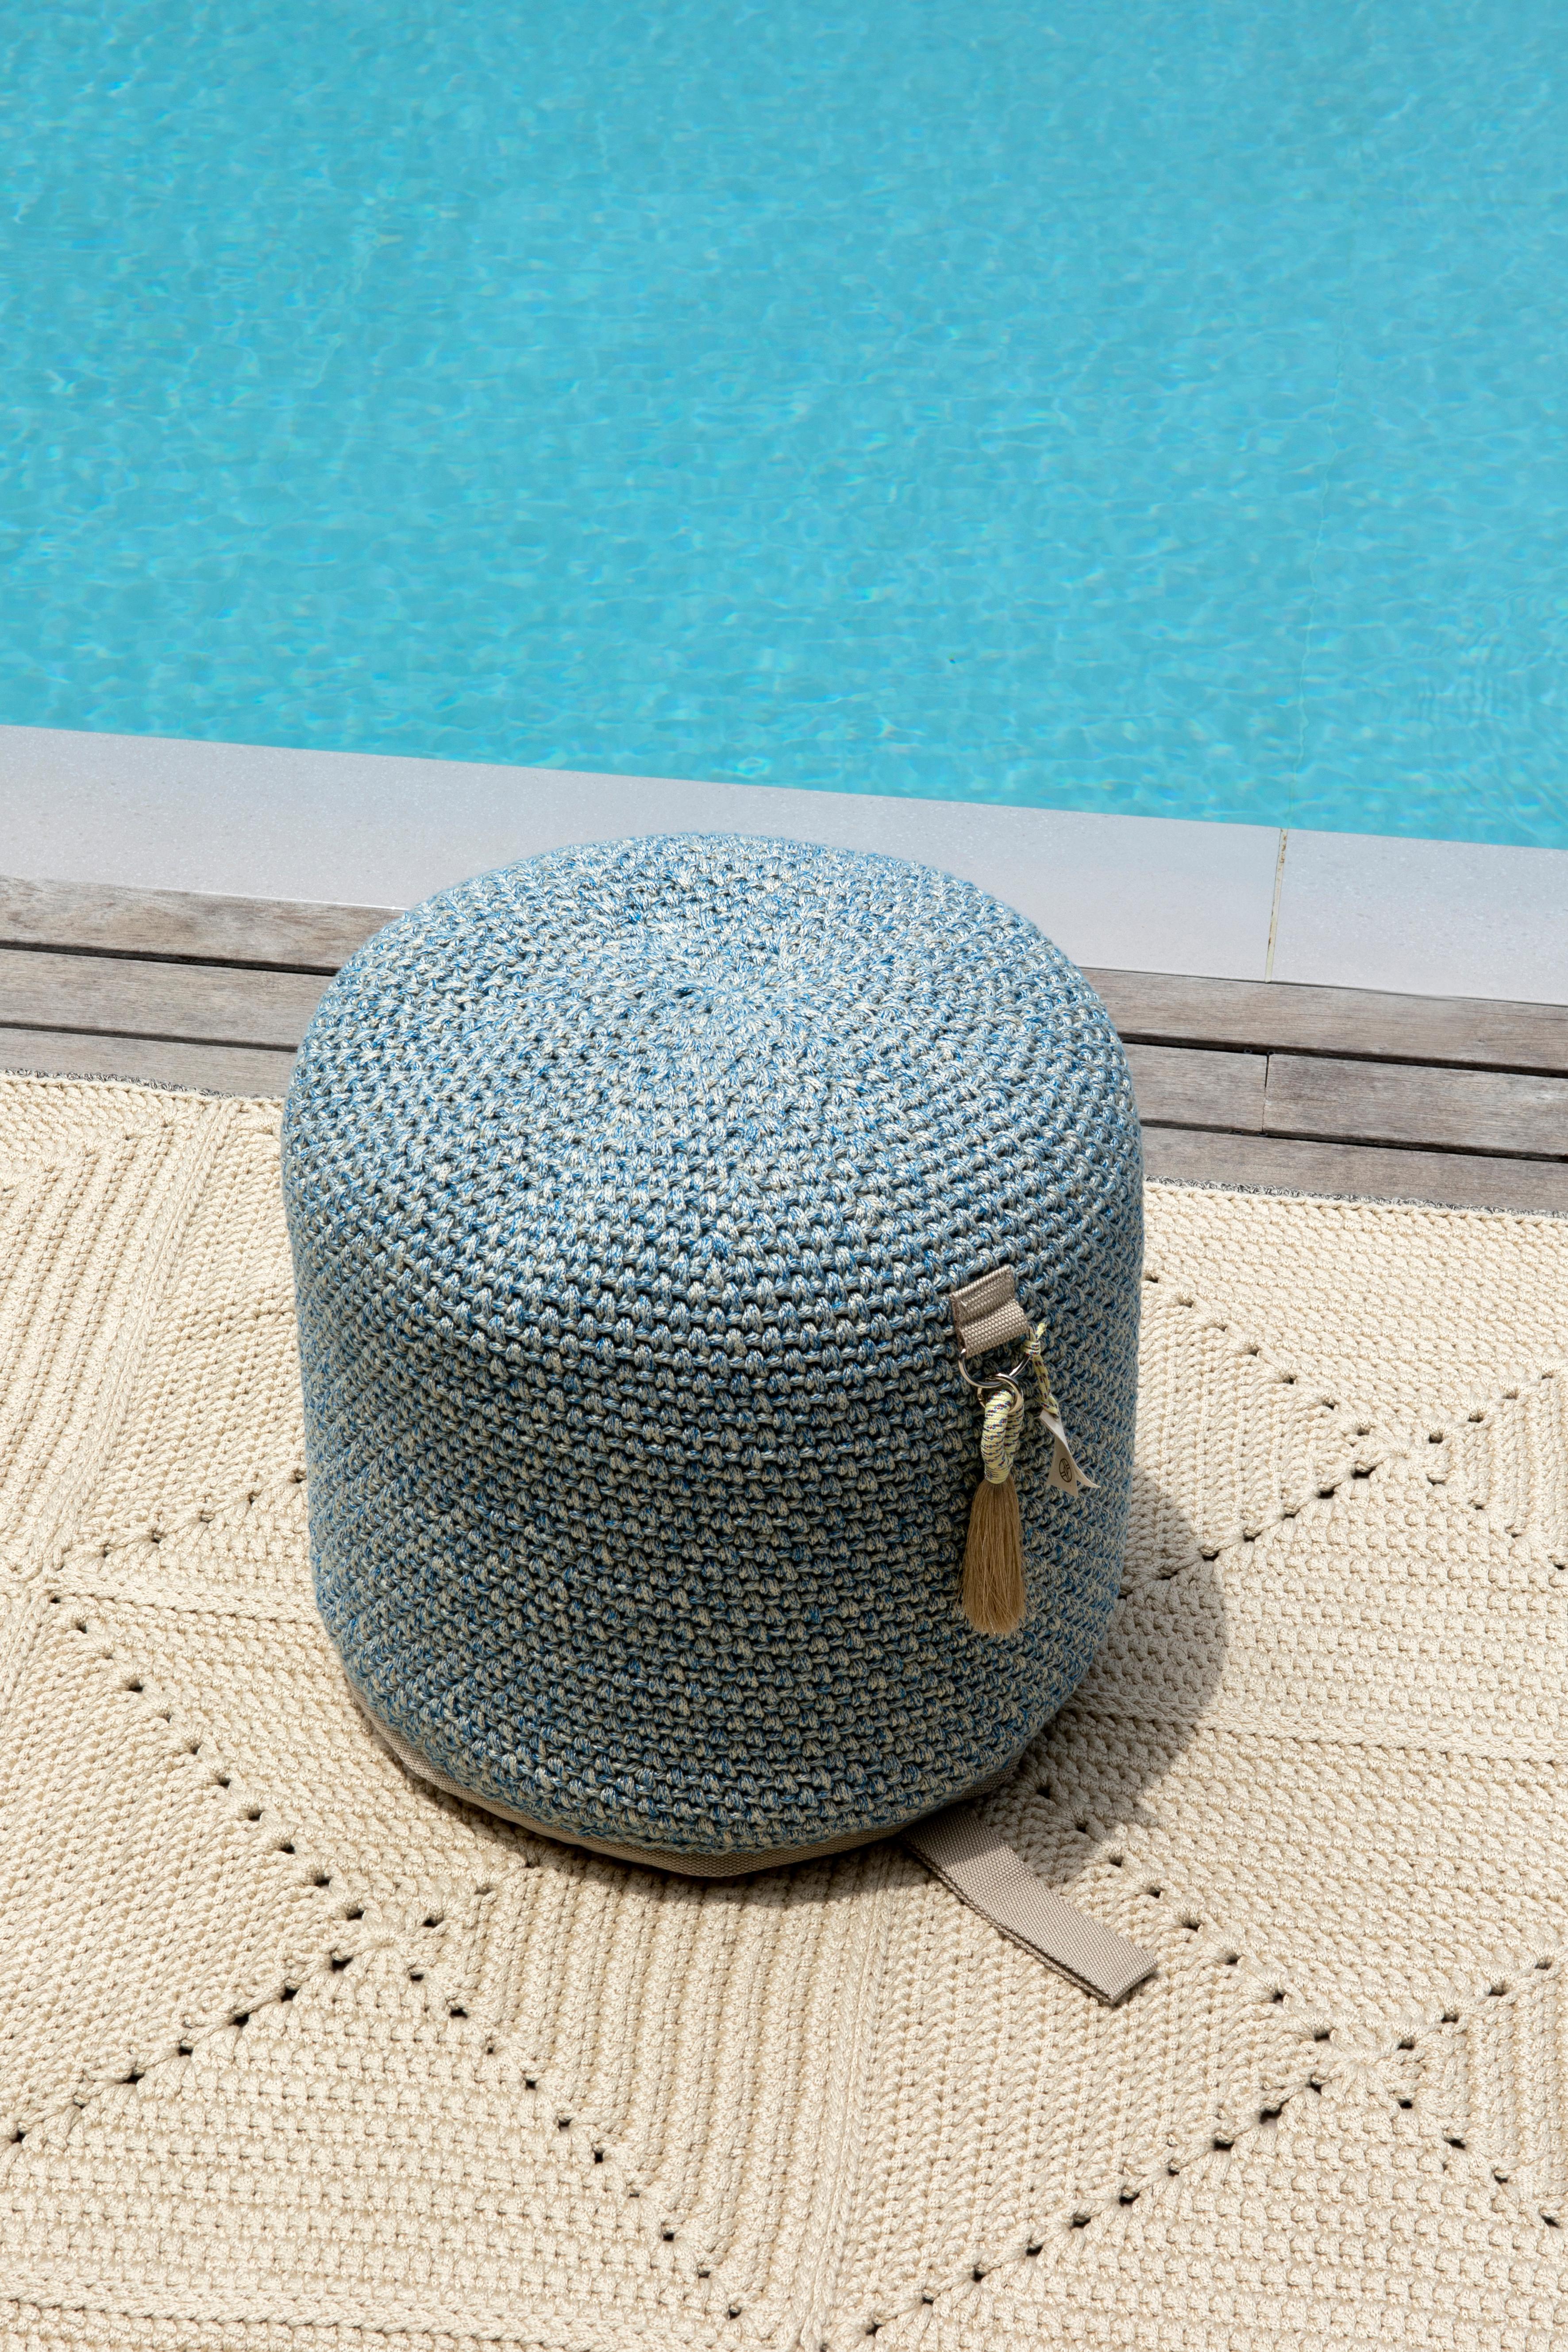 Contemporary 21st Century Asian Blue Sand Outdoor-Indoor Handmade Single Seat Pouf For Sale